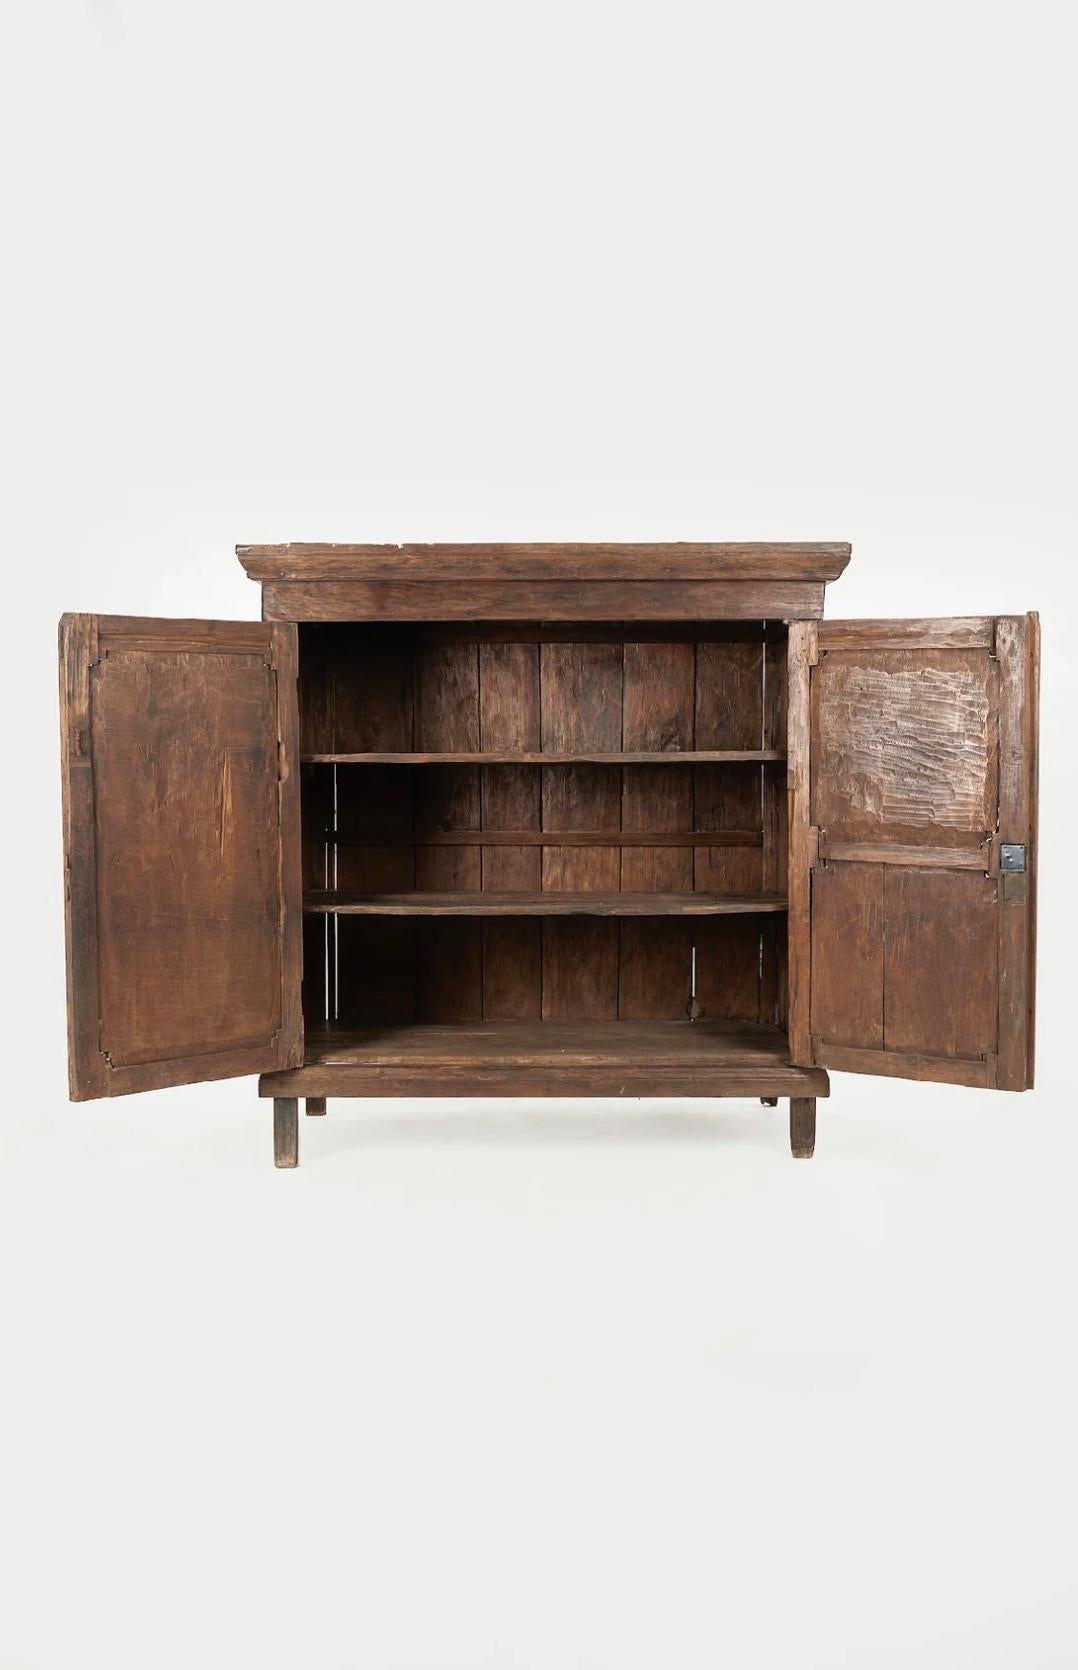 One-of-a-kind and rare colonial Indonesian antique cupboard featuring hand carved scalloped panelling and three internal horizontal shelves. 
The side and back are solid timber boards ensuring a long life and excellent quality craftsmanship.
A very